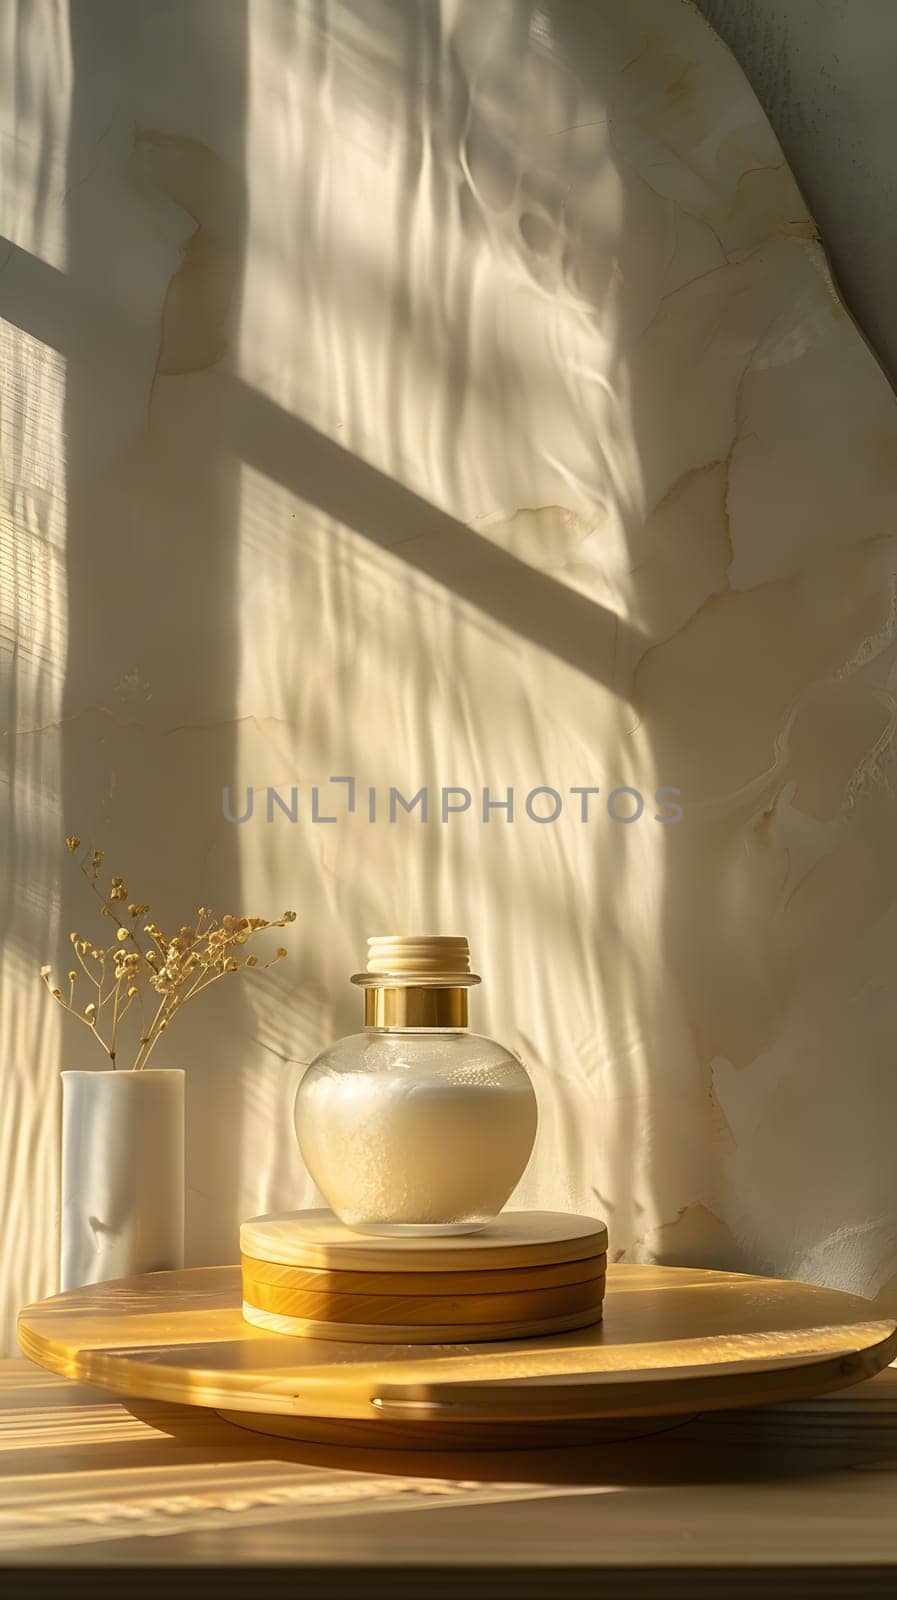 A wooden tray holds a glass vase on a table by the window in a still life setup by Nadtochiy